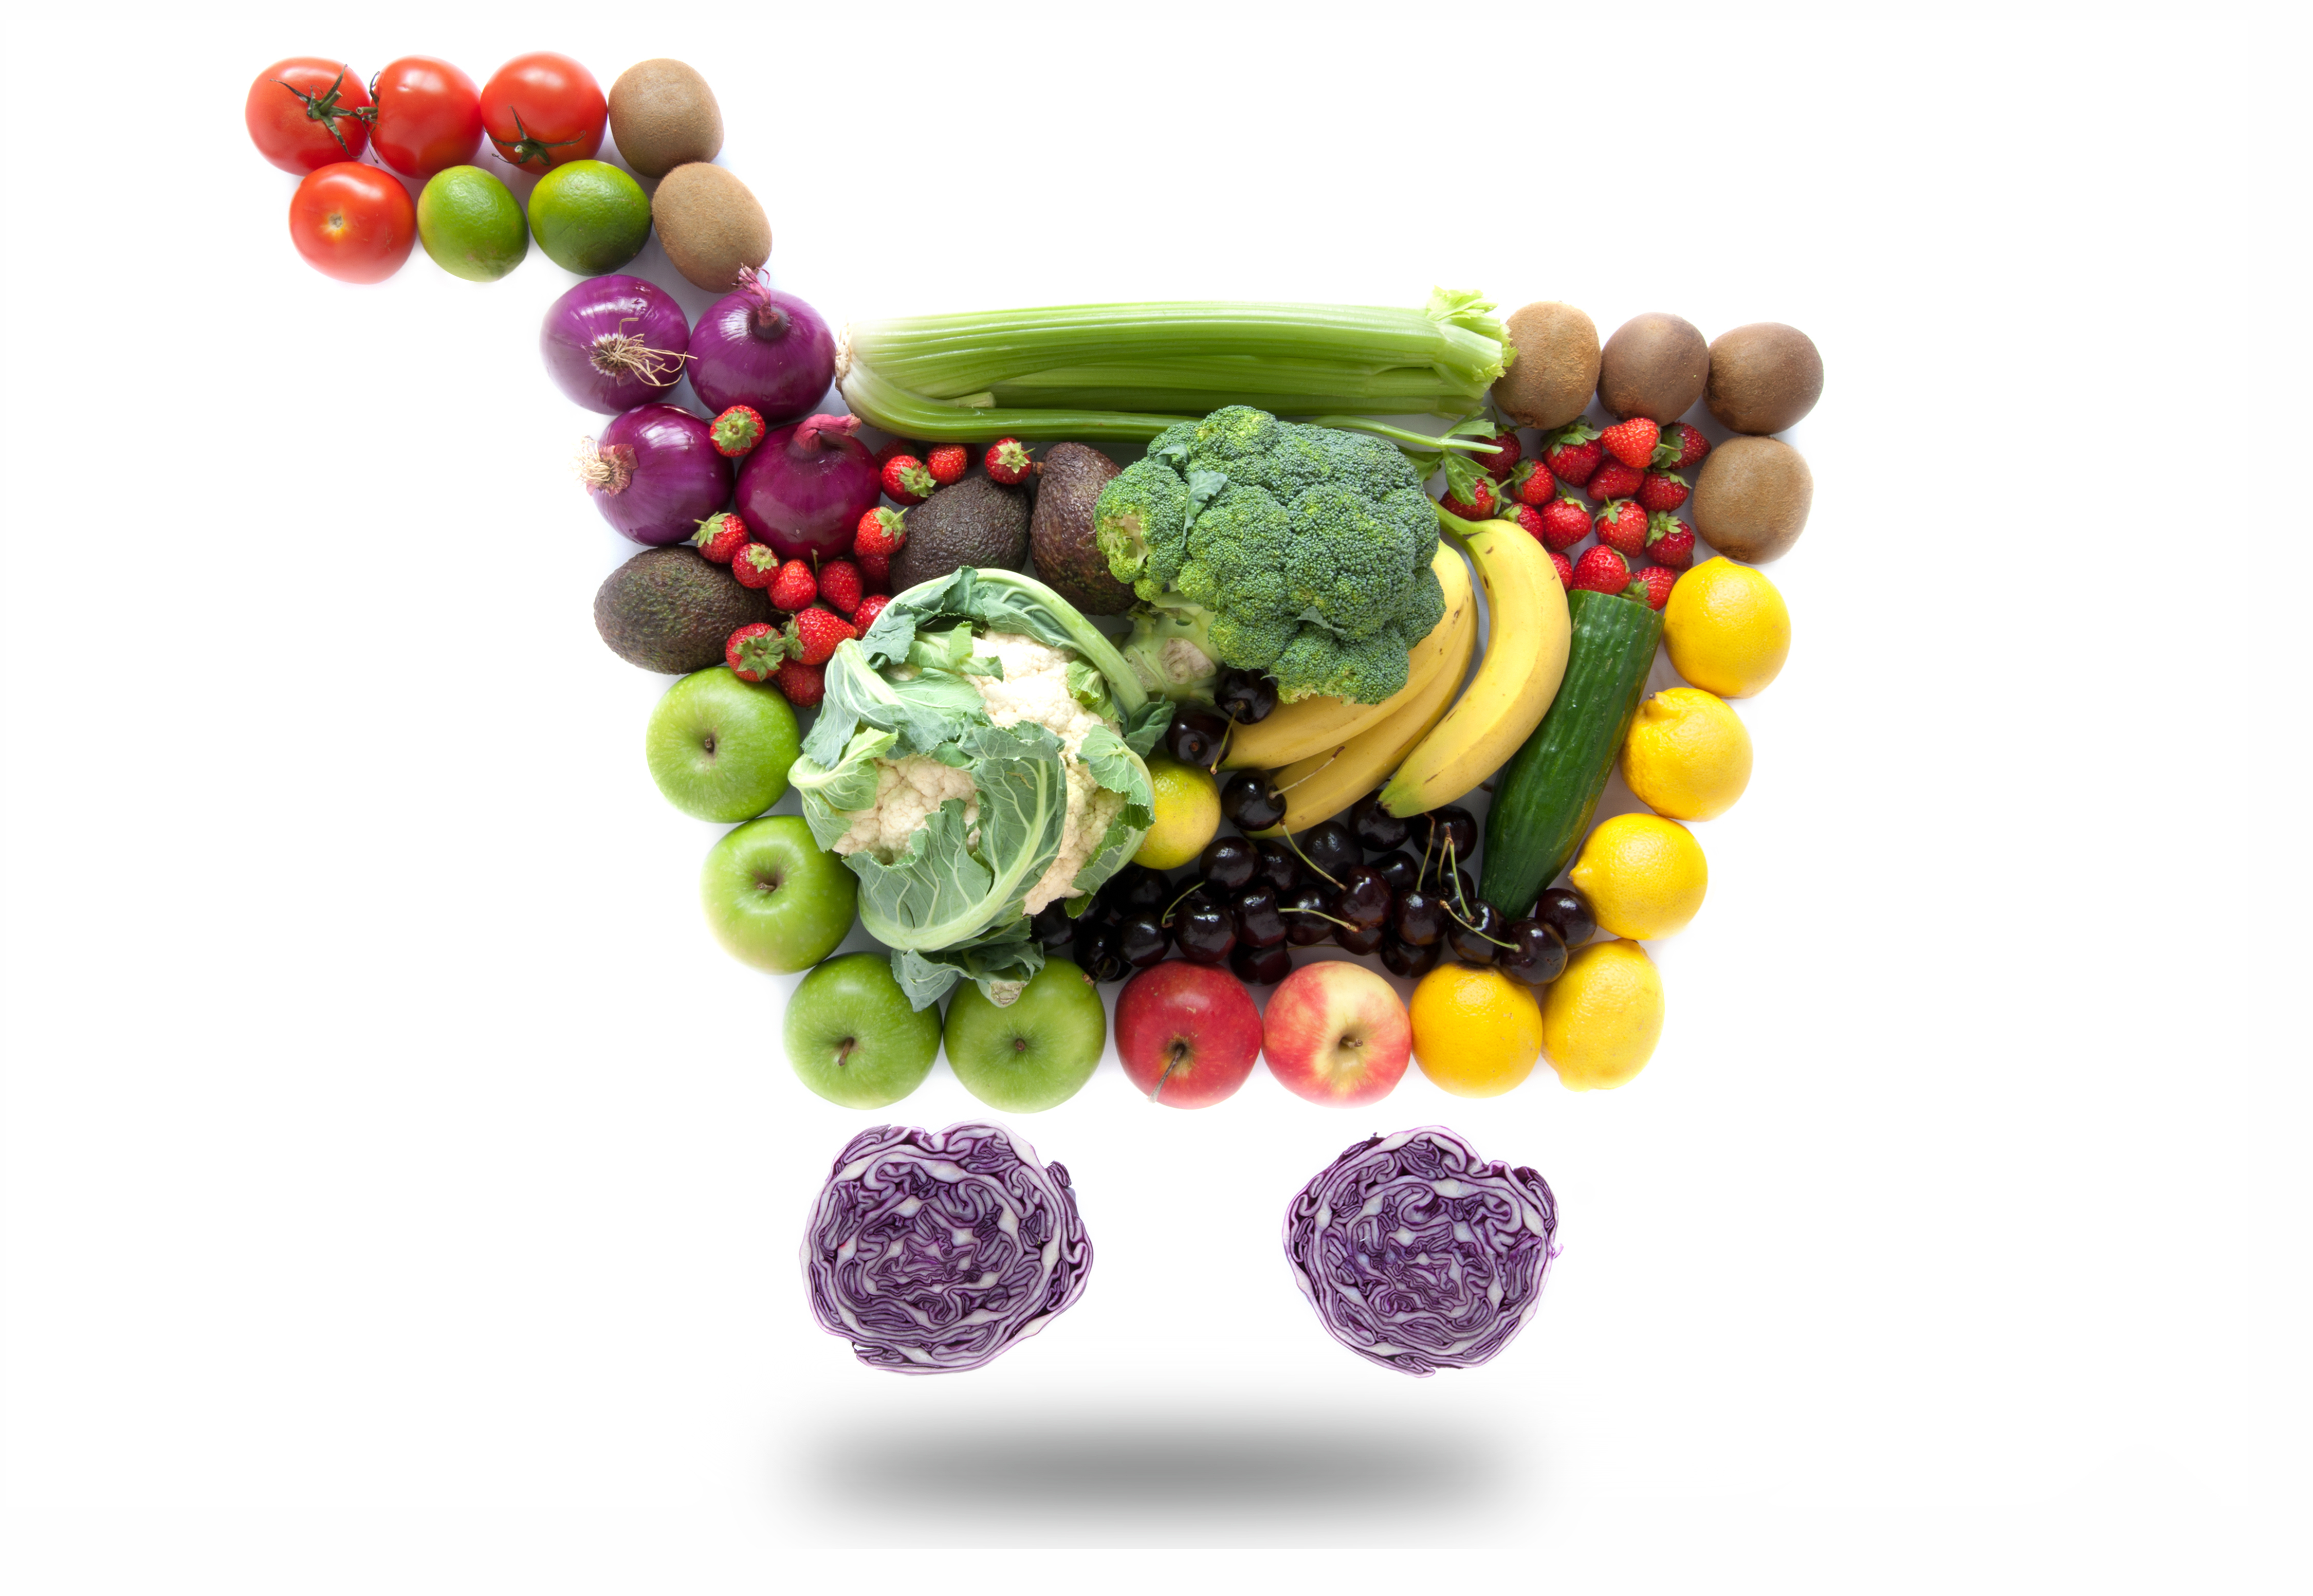 shopping cart icon made of fruits and vegetables